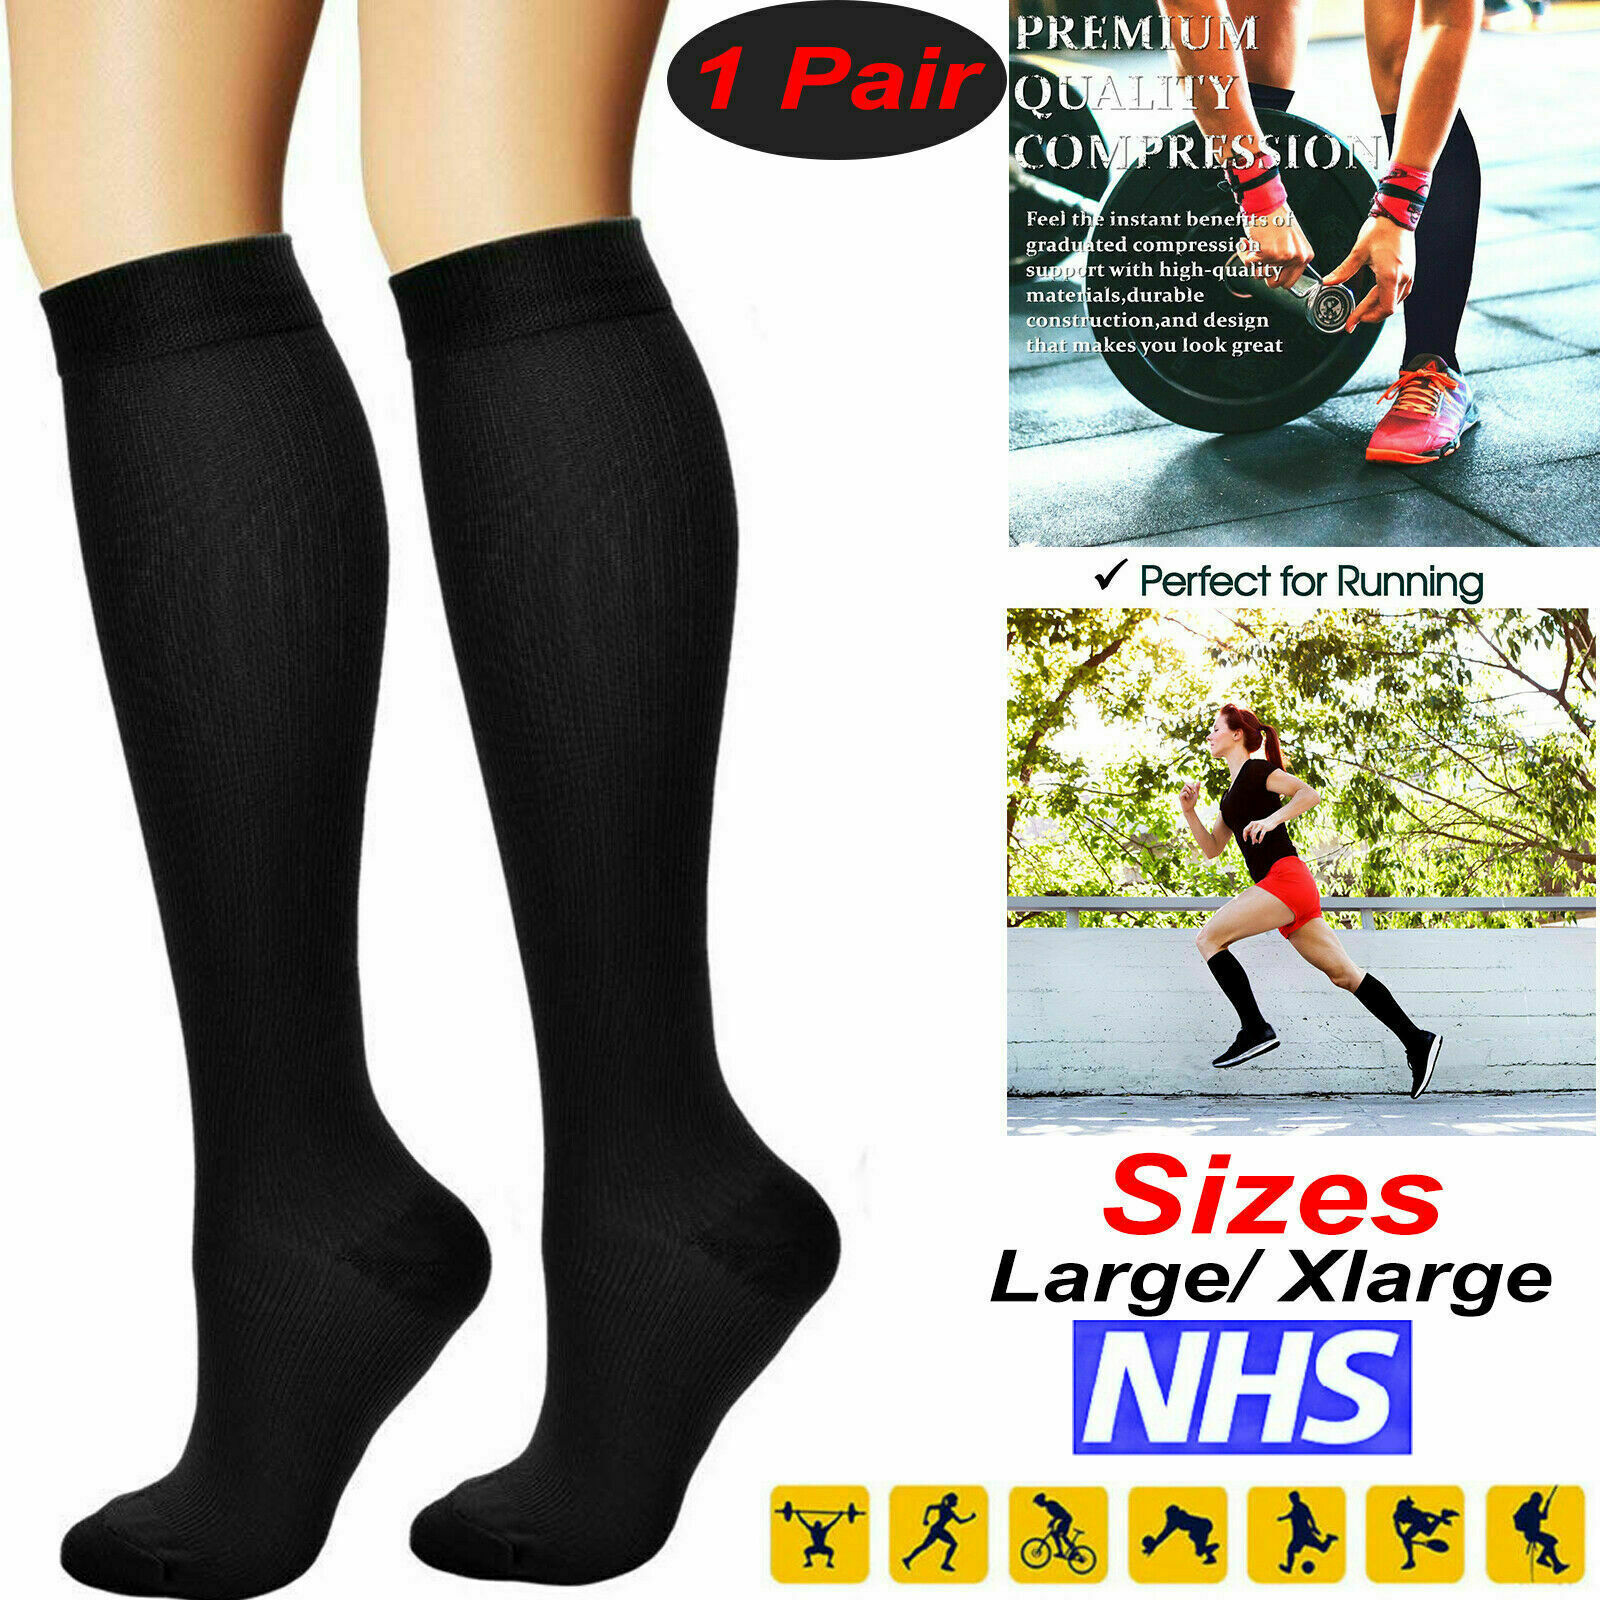 Black Large - Extra Large Unisex Miracle Flight Travel Compression Socks Anti Swelling Fatigue DVT Support